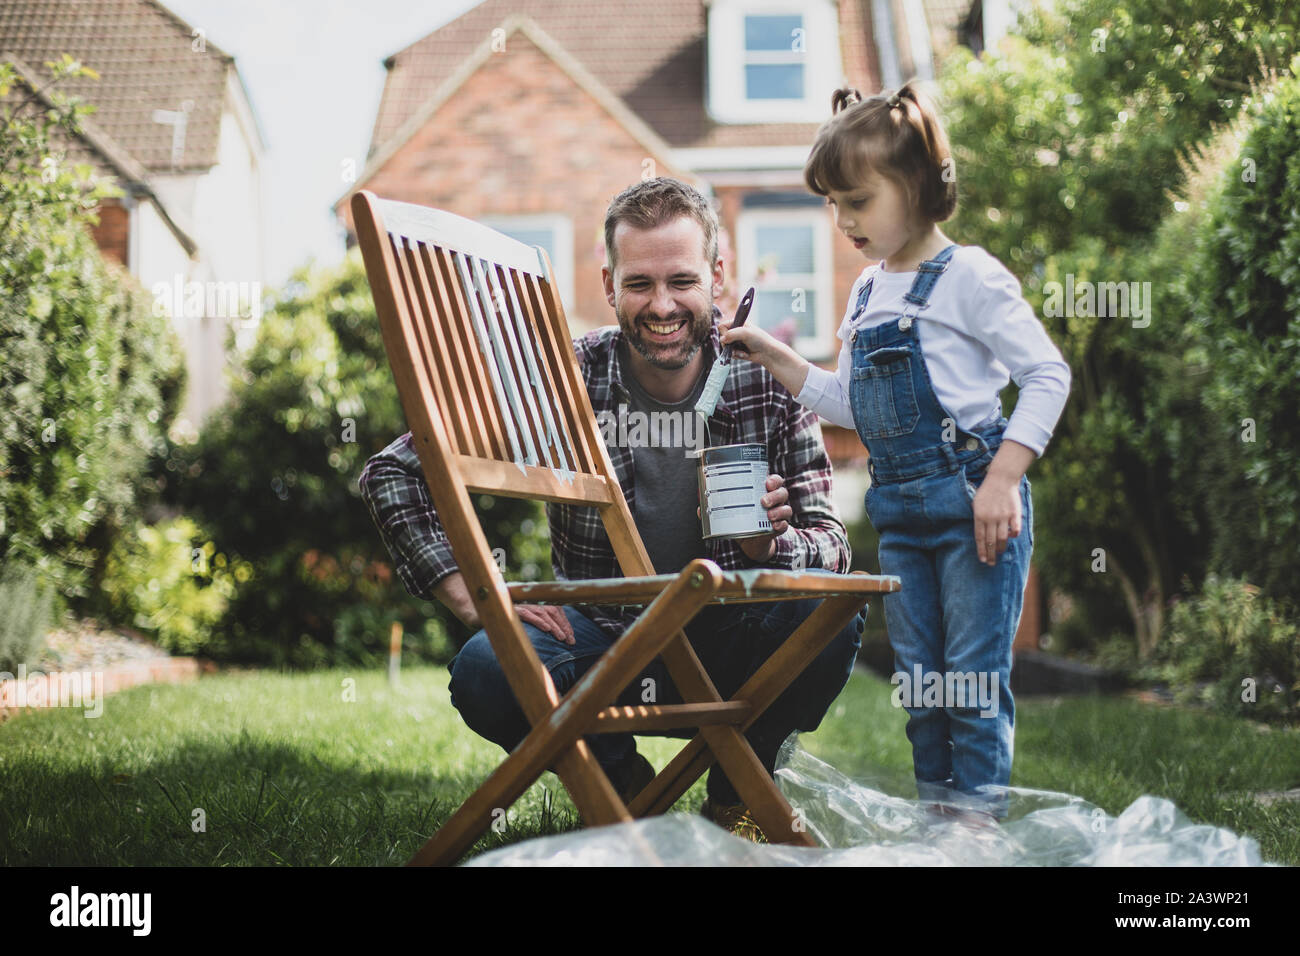 Father and Daughter painting garden furniture together Stock Photo